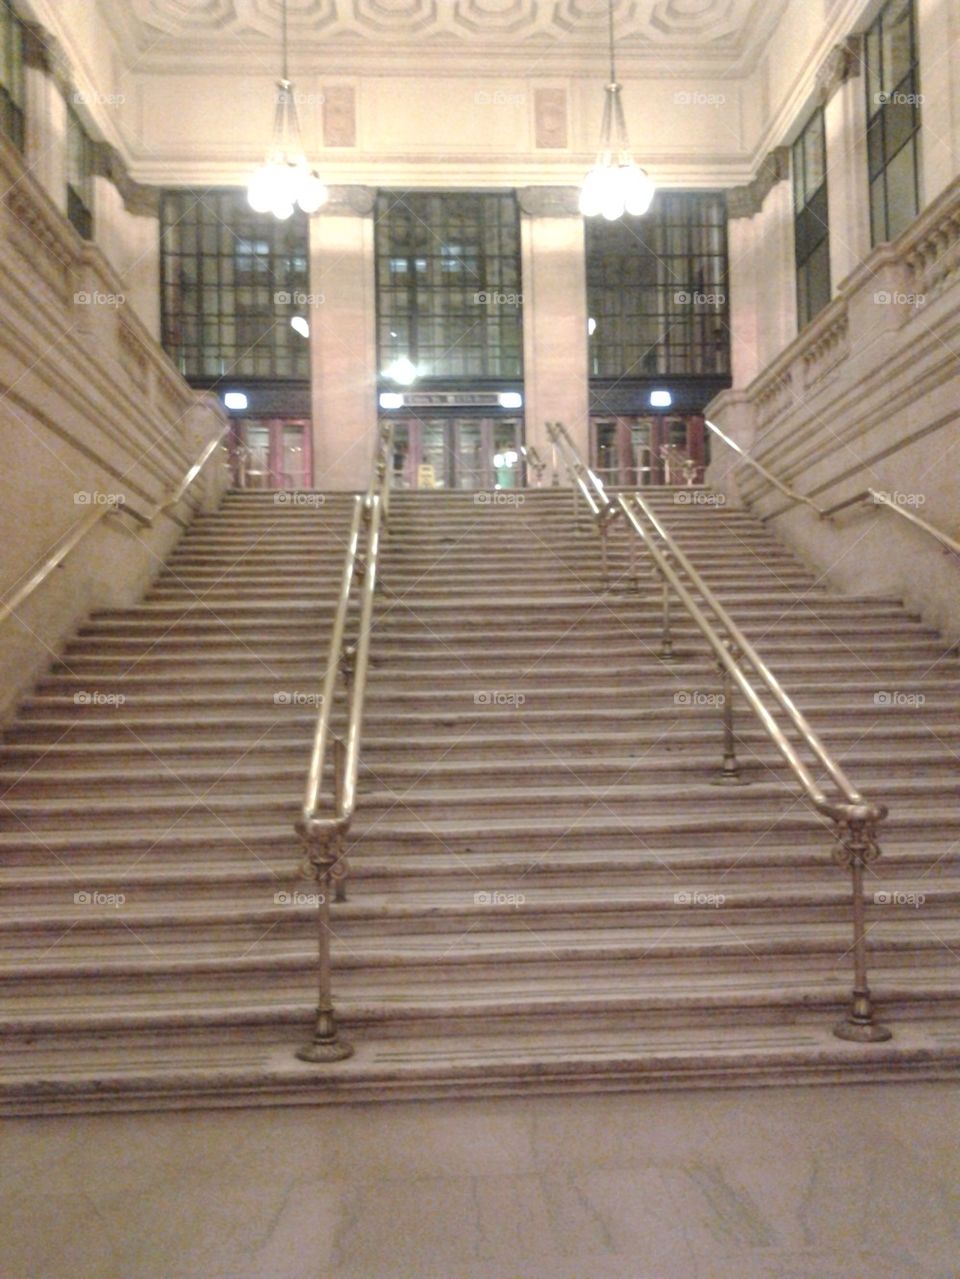 Stairs at Union Station Chicago 